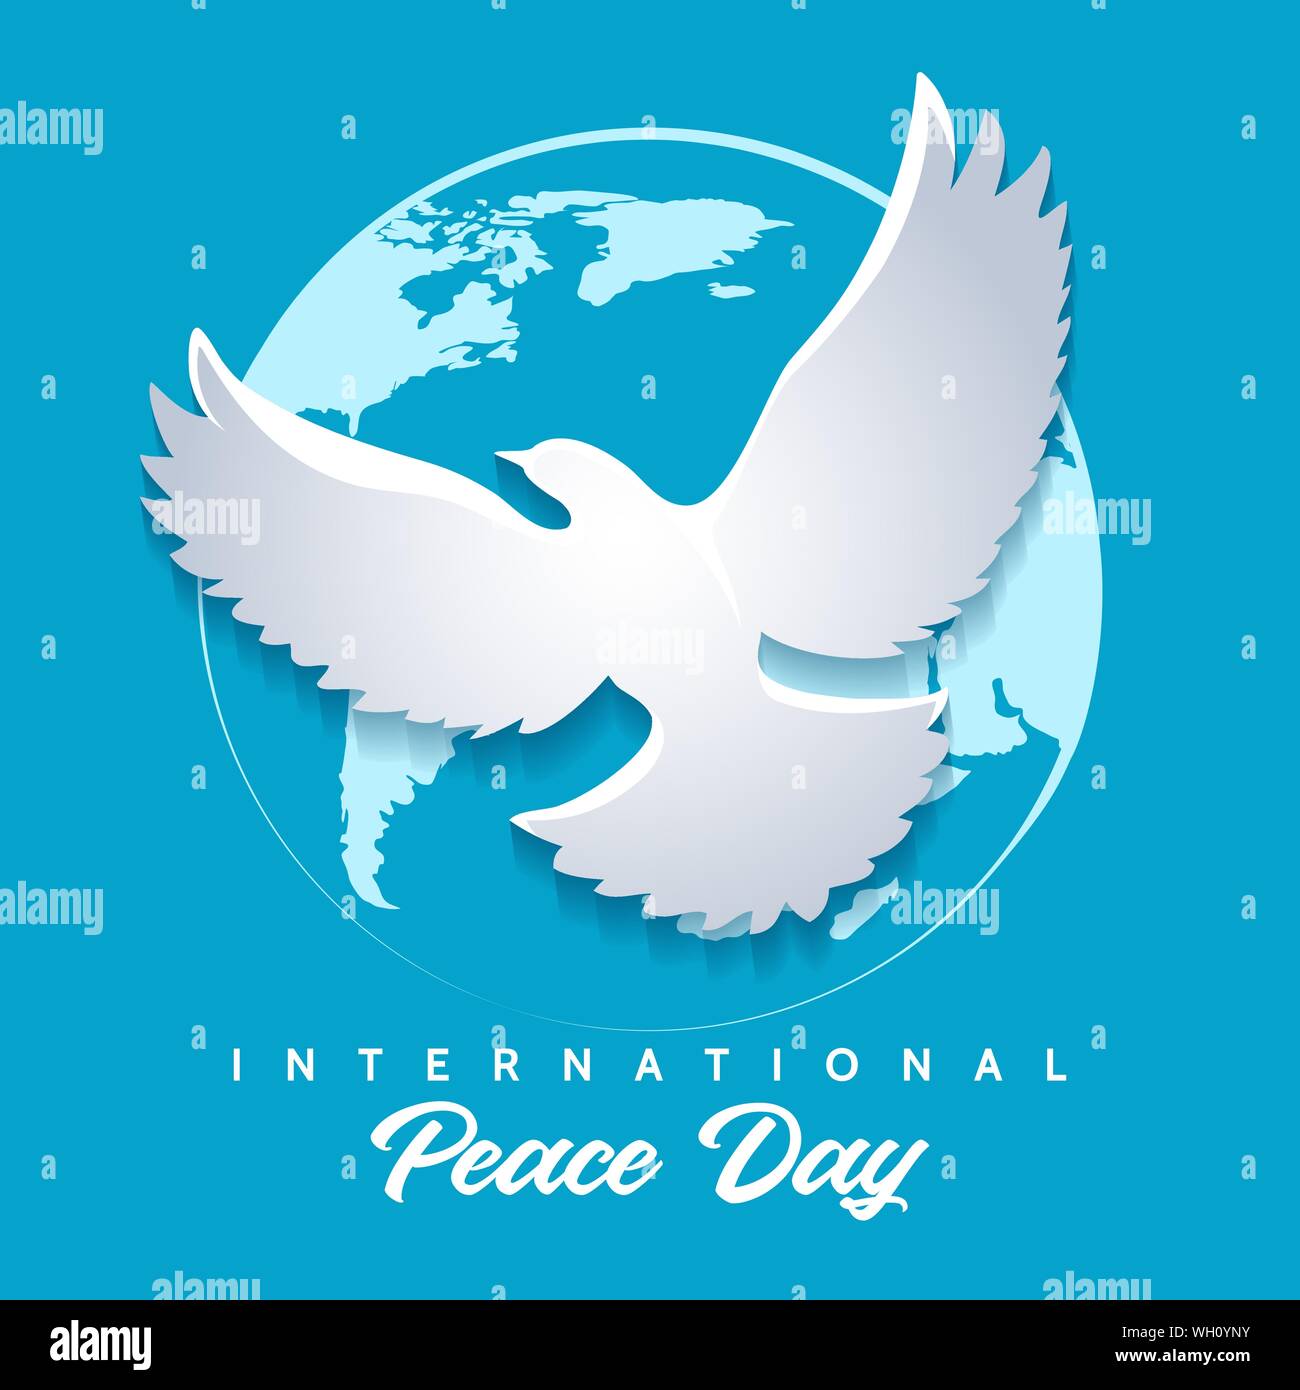 International Peace Day emblem. Dove of Peace against globe silhouette. Vector illustration Stock Vector